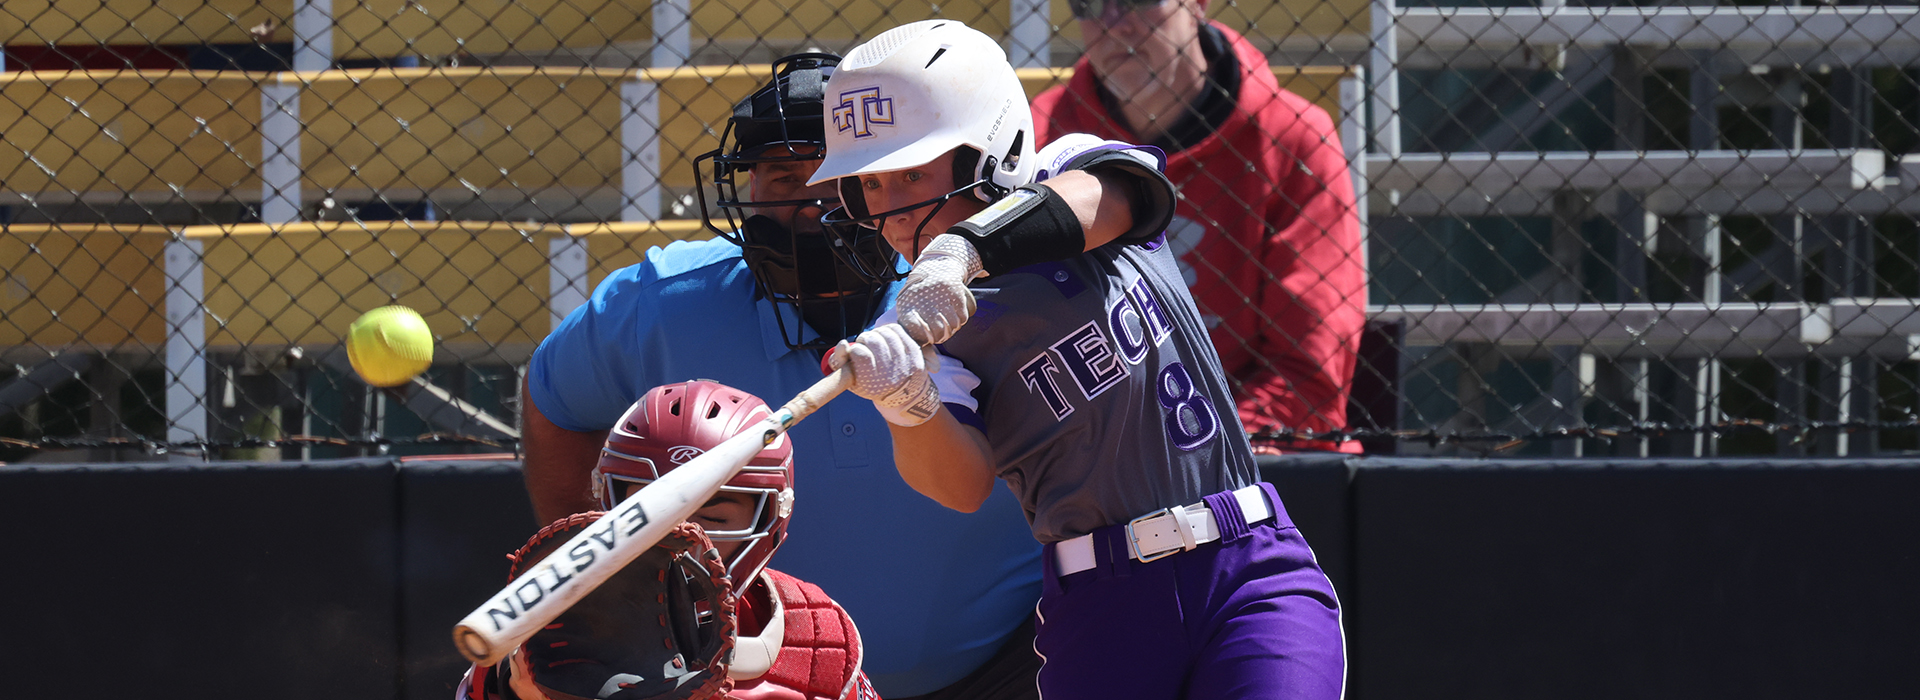 Tech softball falls to SIUE in finale